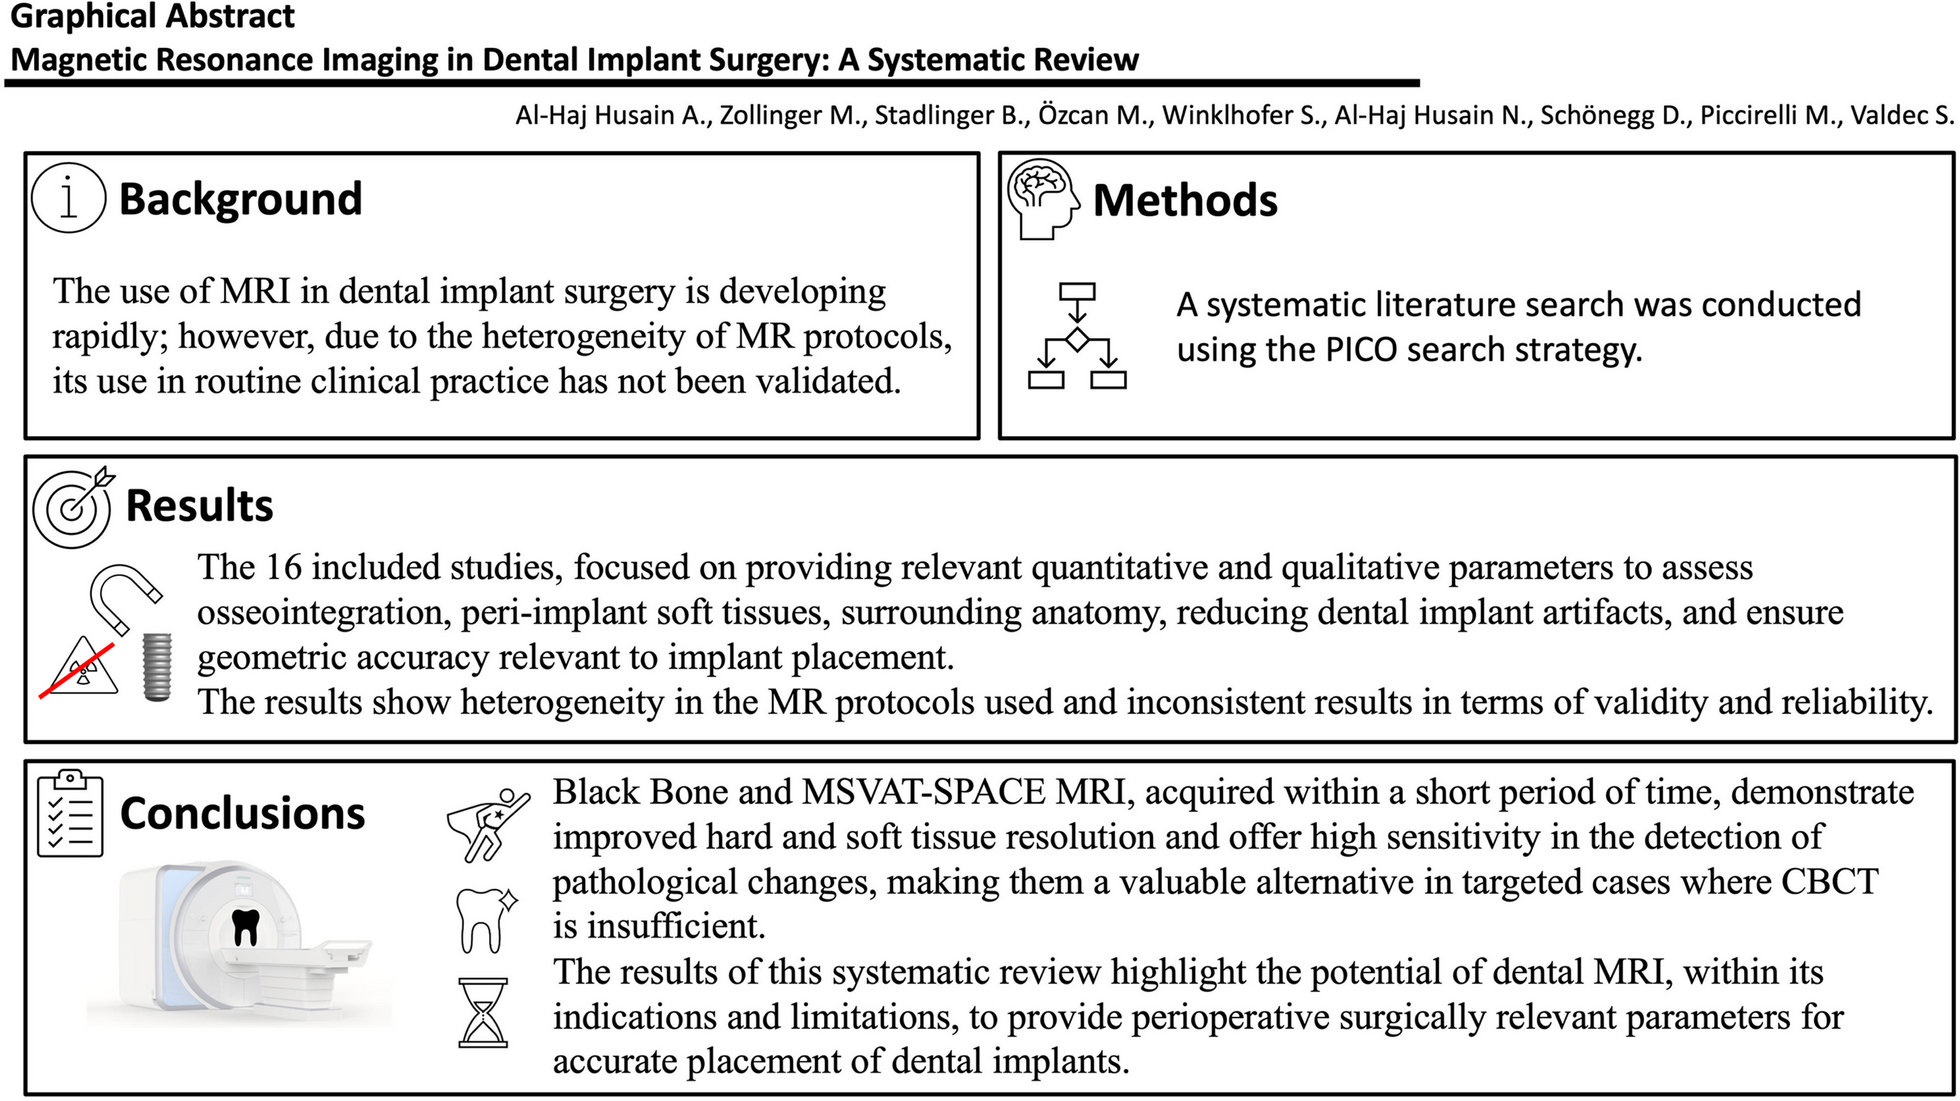 Magnetic resonance imaging in dental implant surgery: a systematic review